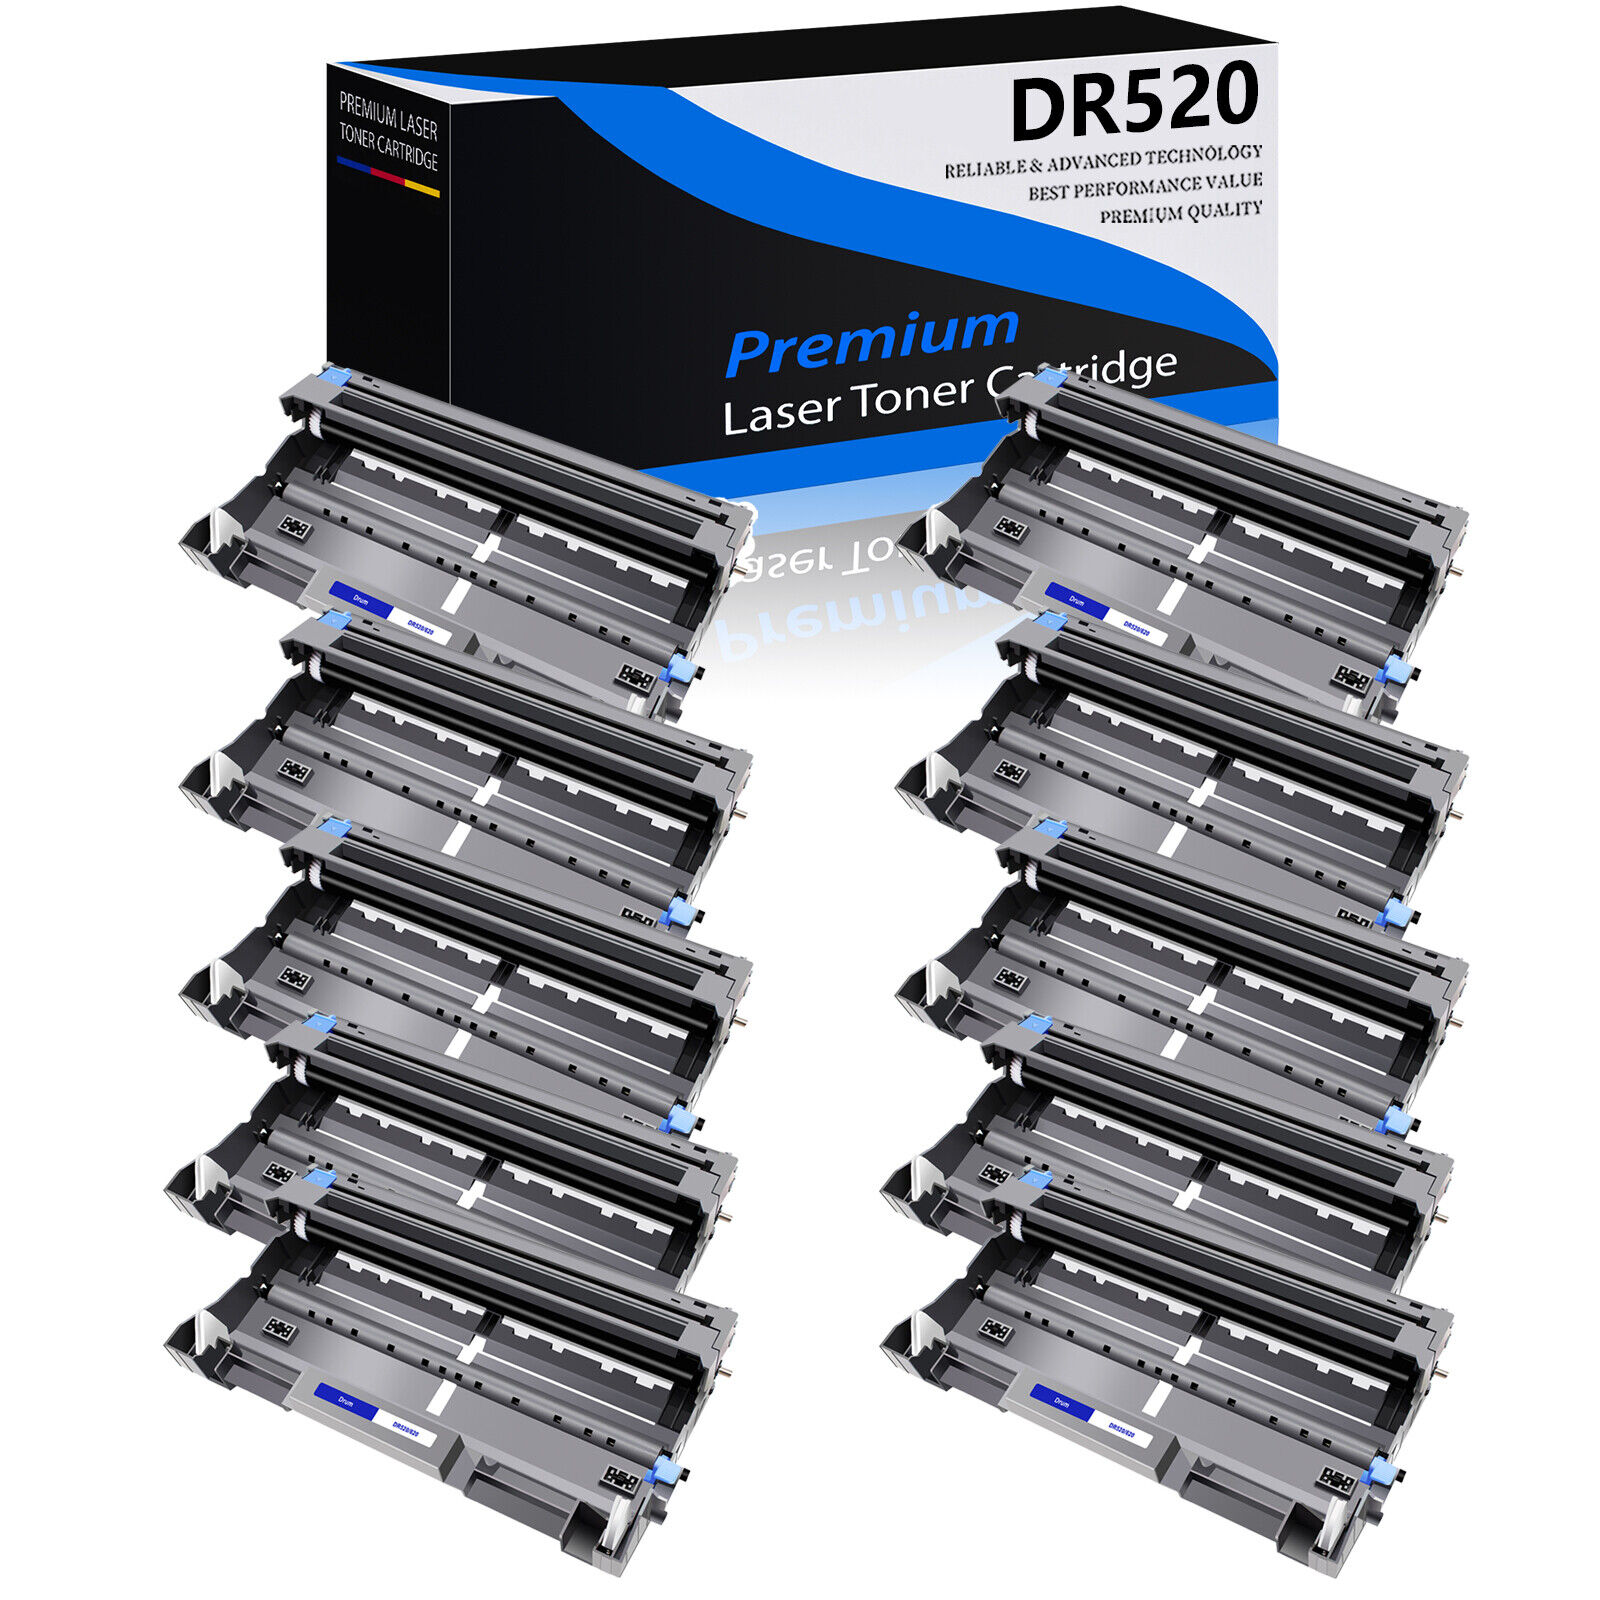 10PK High Yield DR520 Drum Unit for Brother DR-520 DCP-8065 DCP-8065DN HL-5200